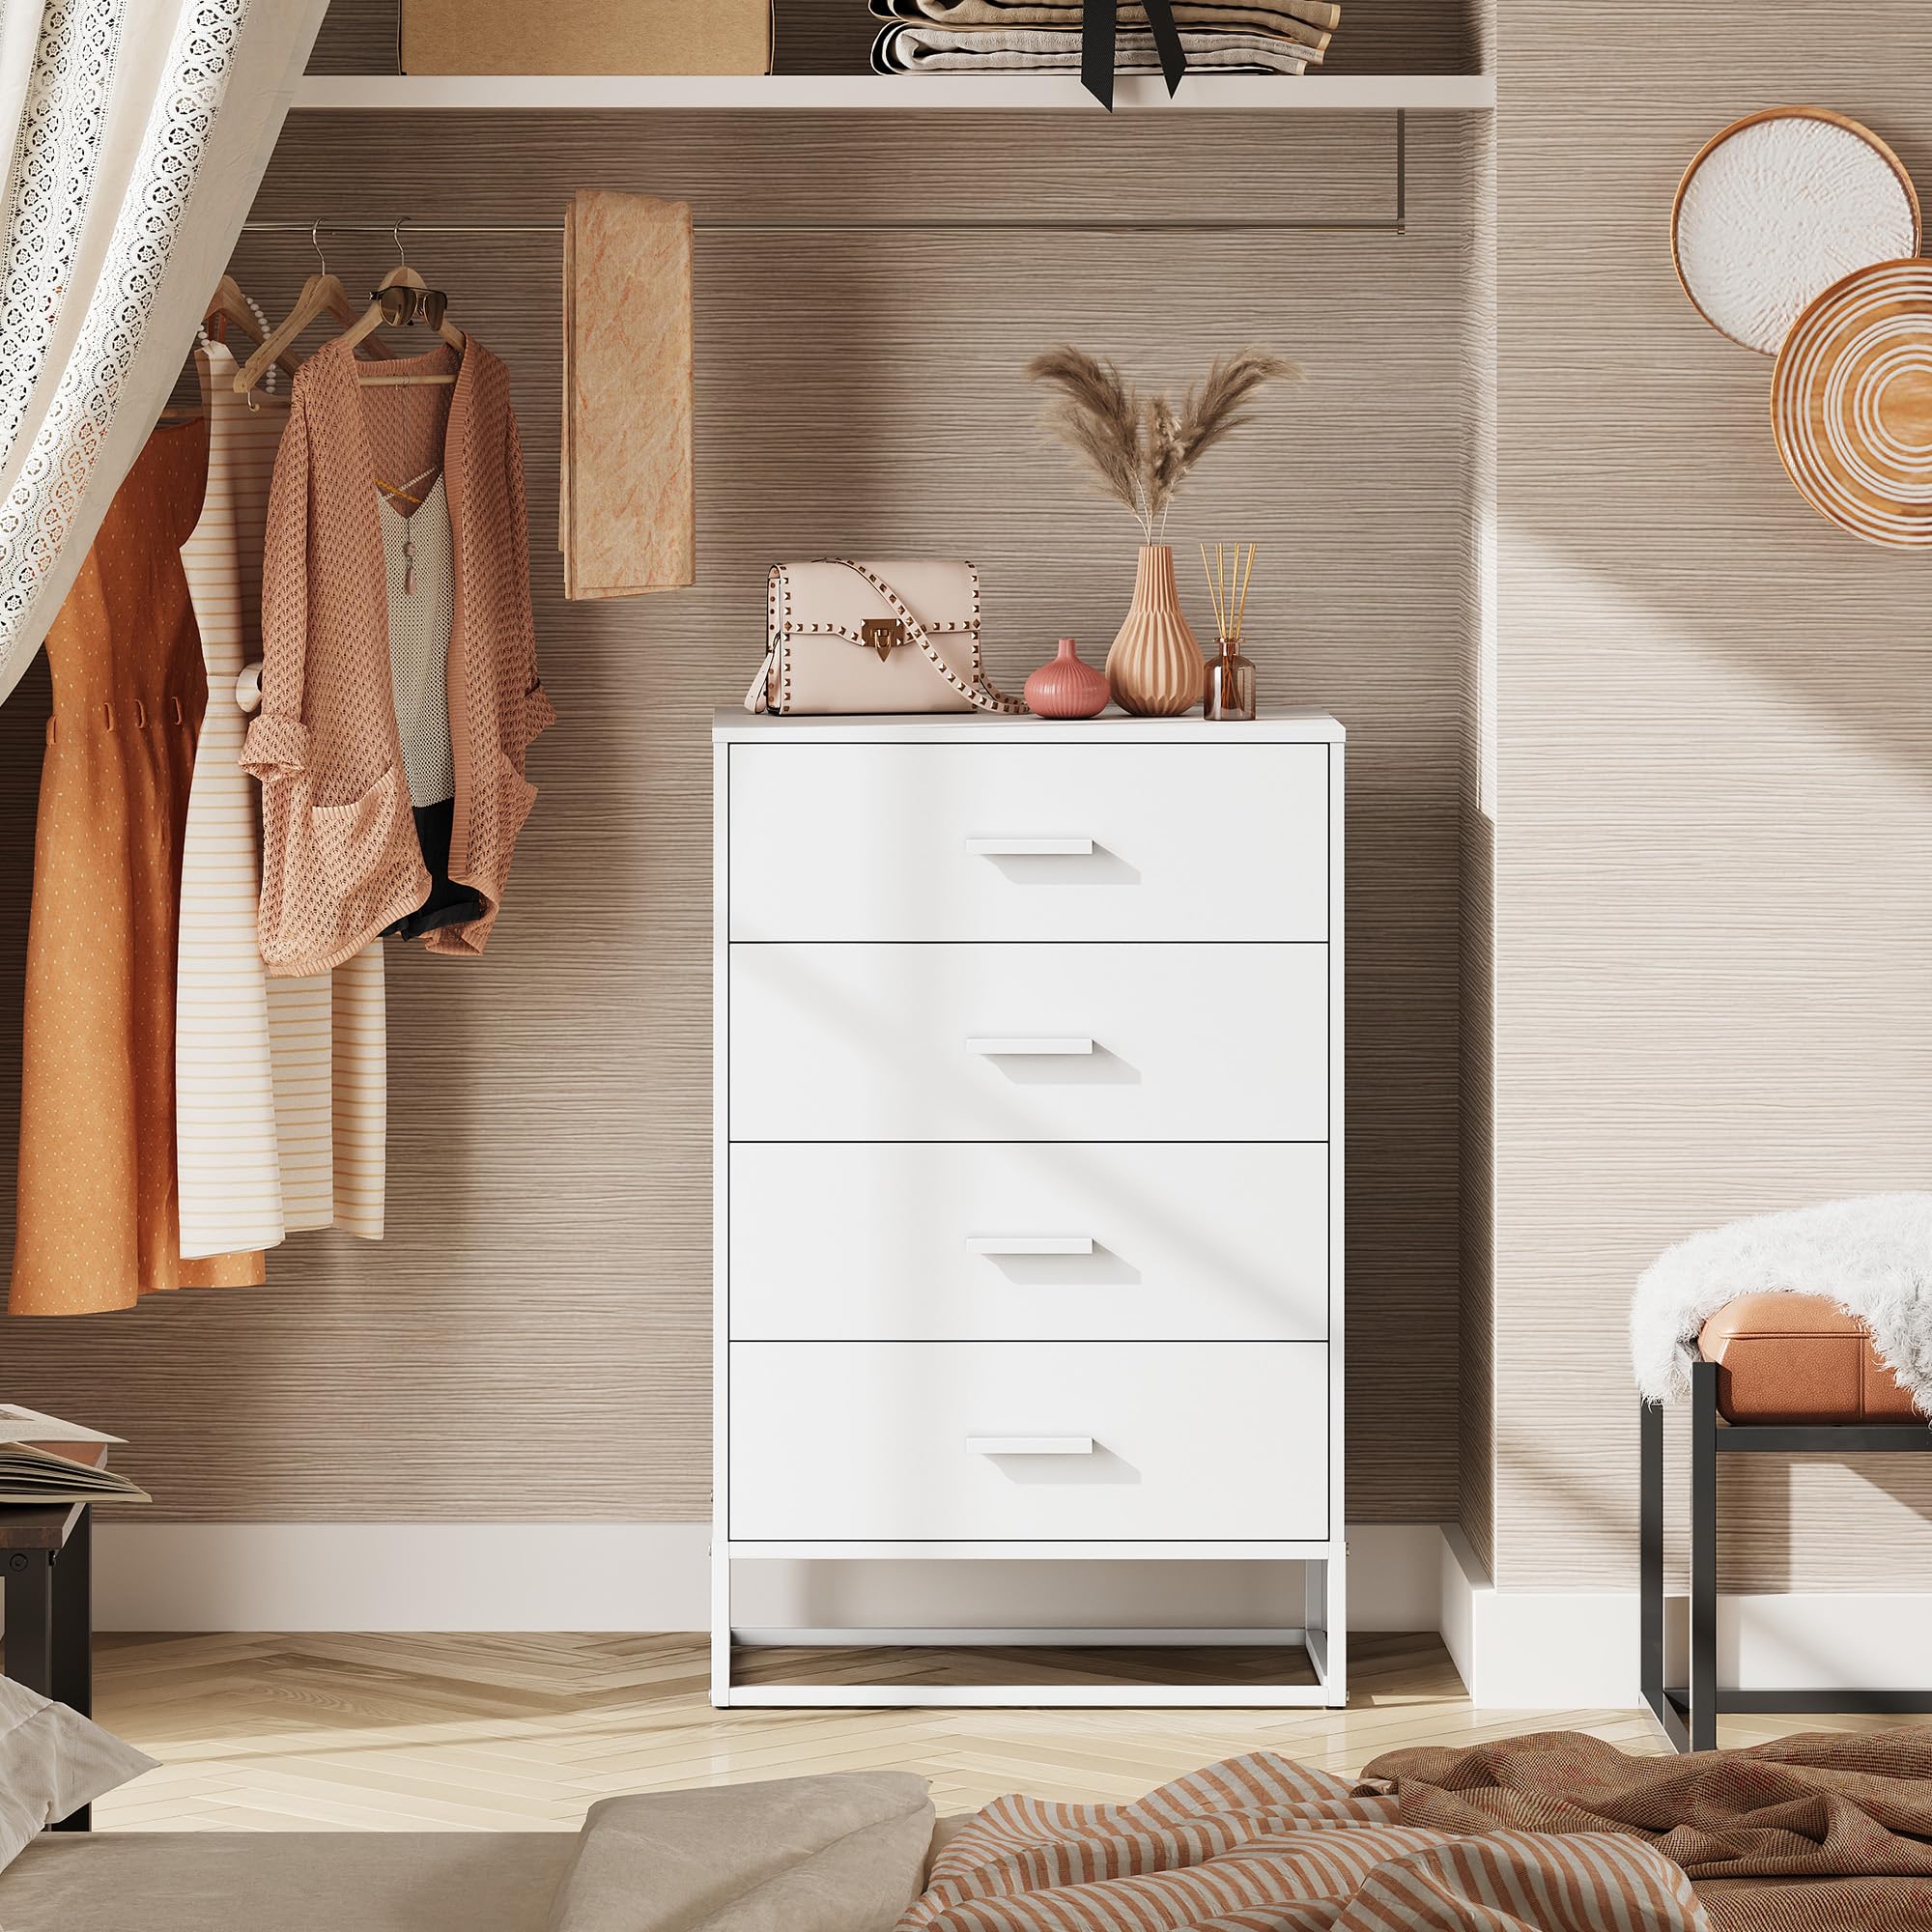 WLIVE Wood Dresser for Bedroom with 4 Drawers, Nightstand, Chest of Drawers, Tall Dresser Drawers with Sturdy Metal Frame for Hallway, Living Room, Closet, White